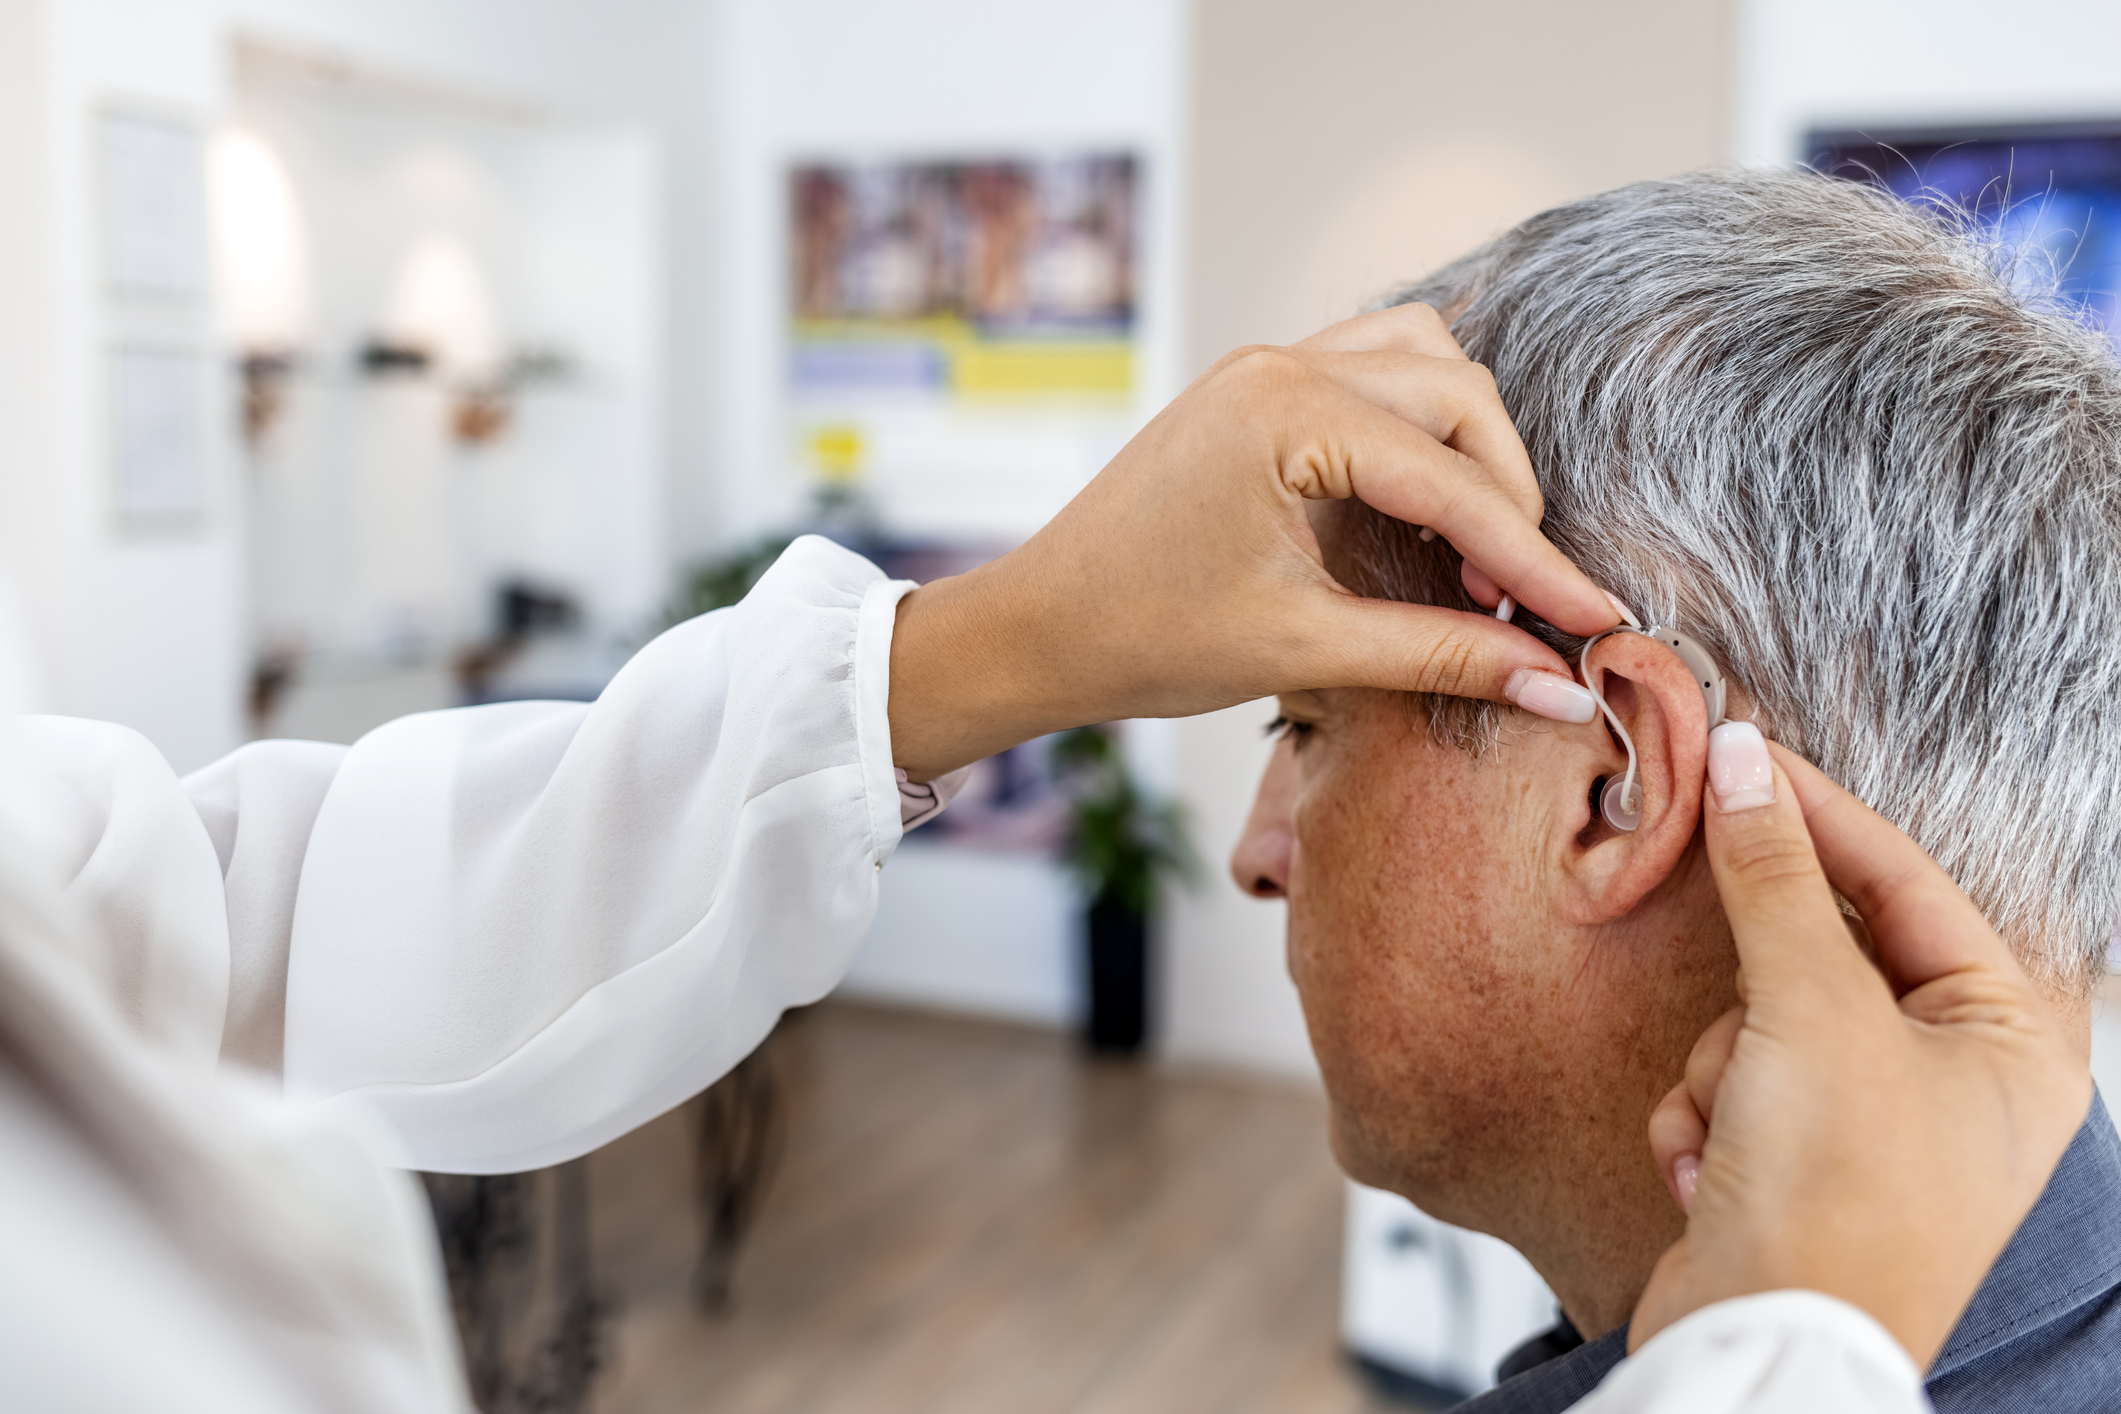 private insurance companies, fitting hearing aids, medicare cover hearing tests.